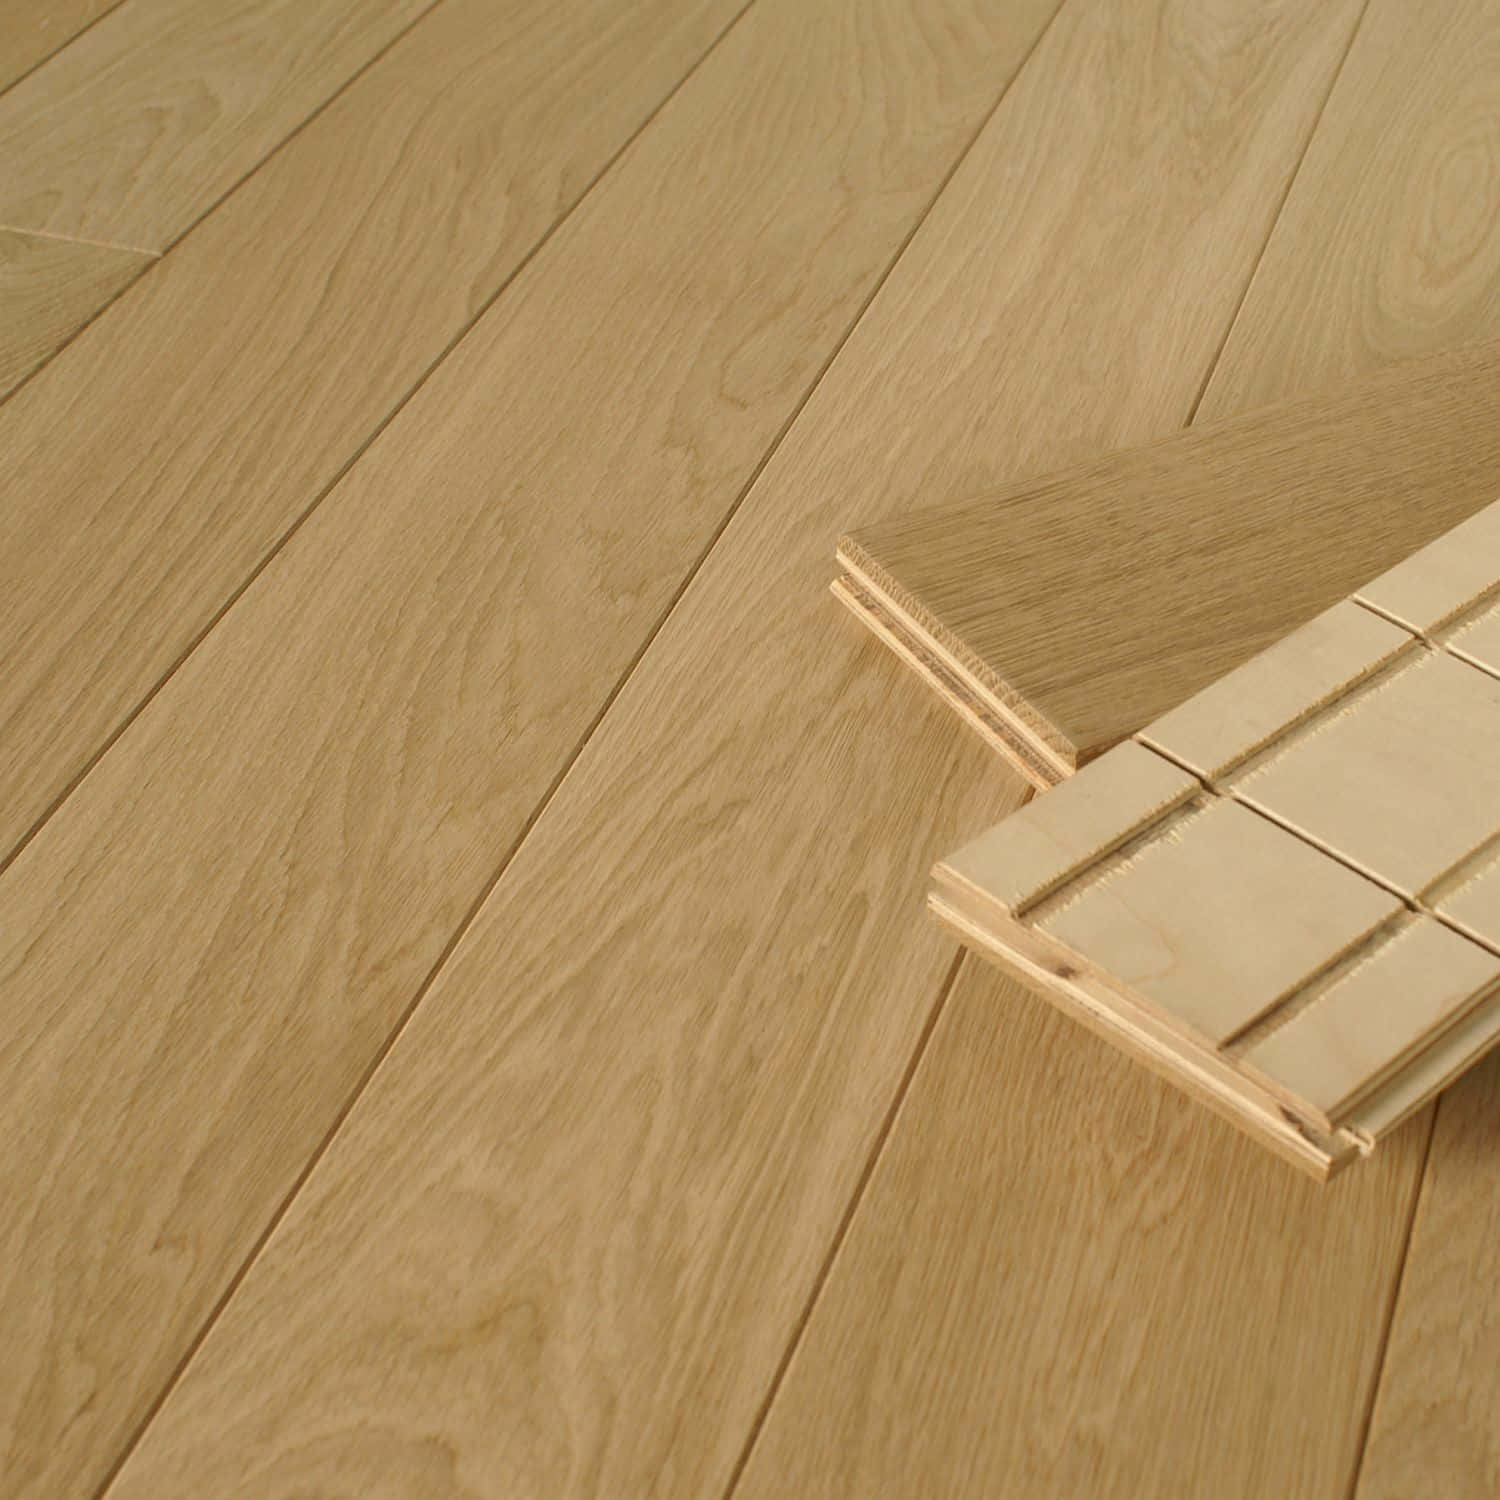 A Wooden Floor With Wood Strips On It